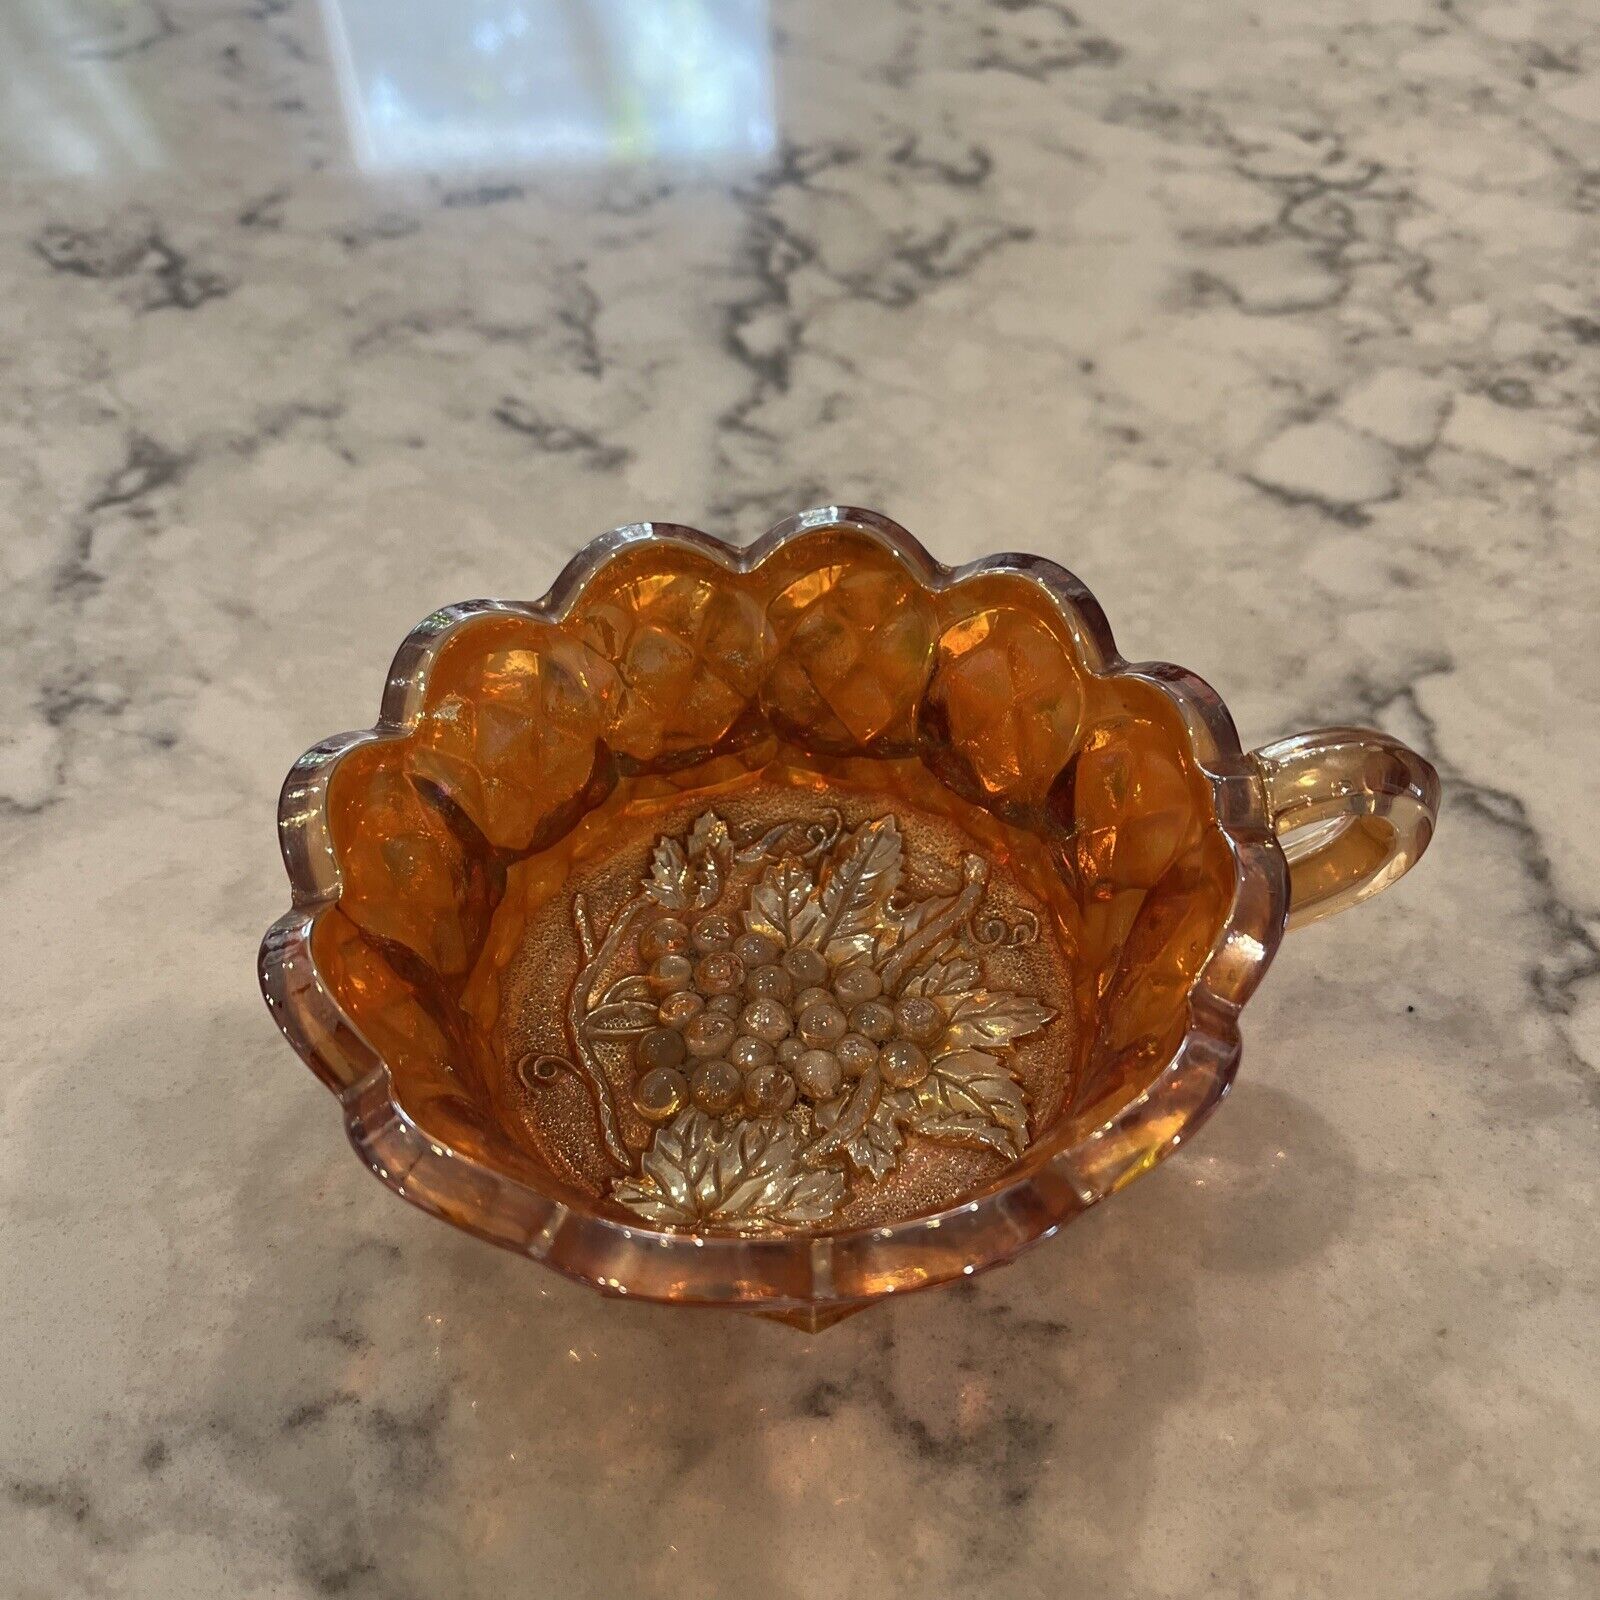 CARNIVAL GLASS ORANGE MARIGOLD GRAPES AND LEAVES NAPPY BOWL 3D ONE HANDLE